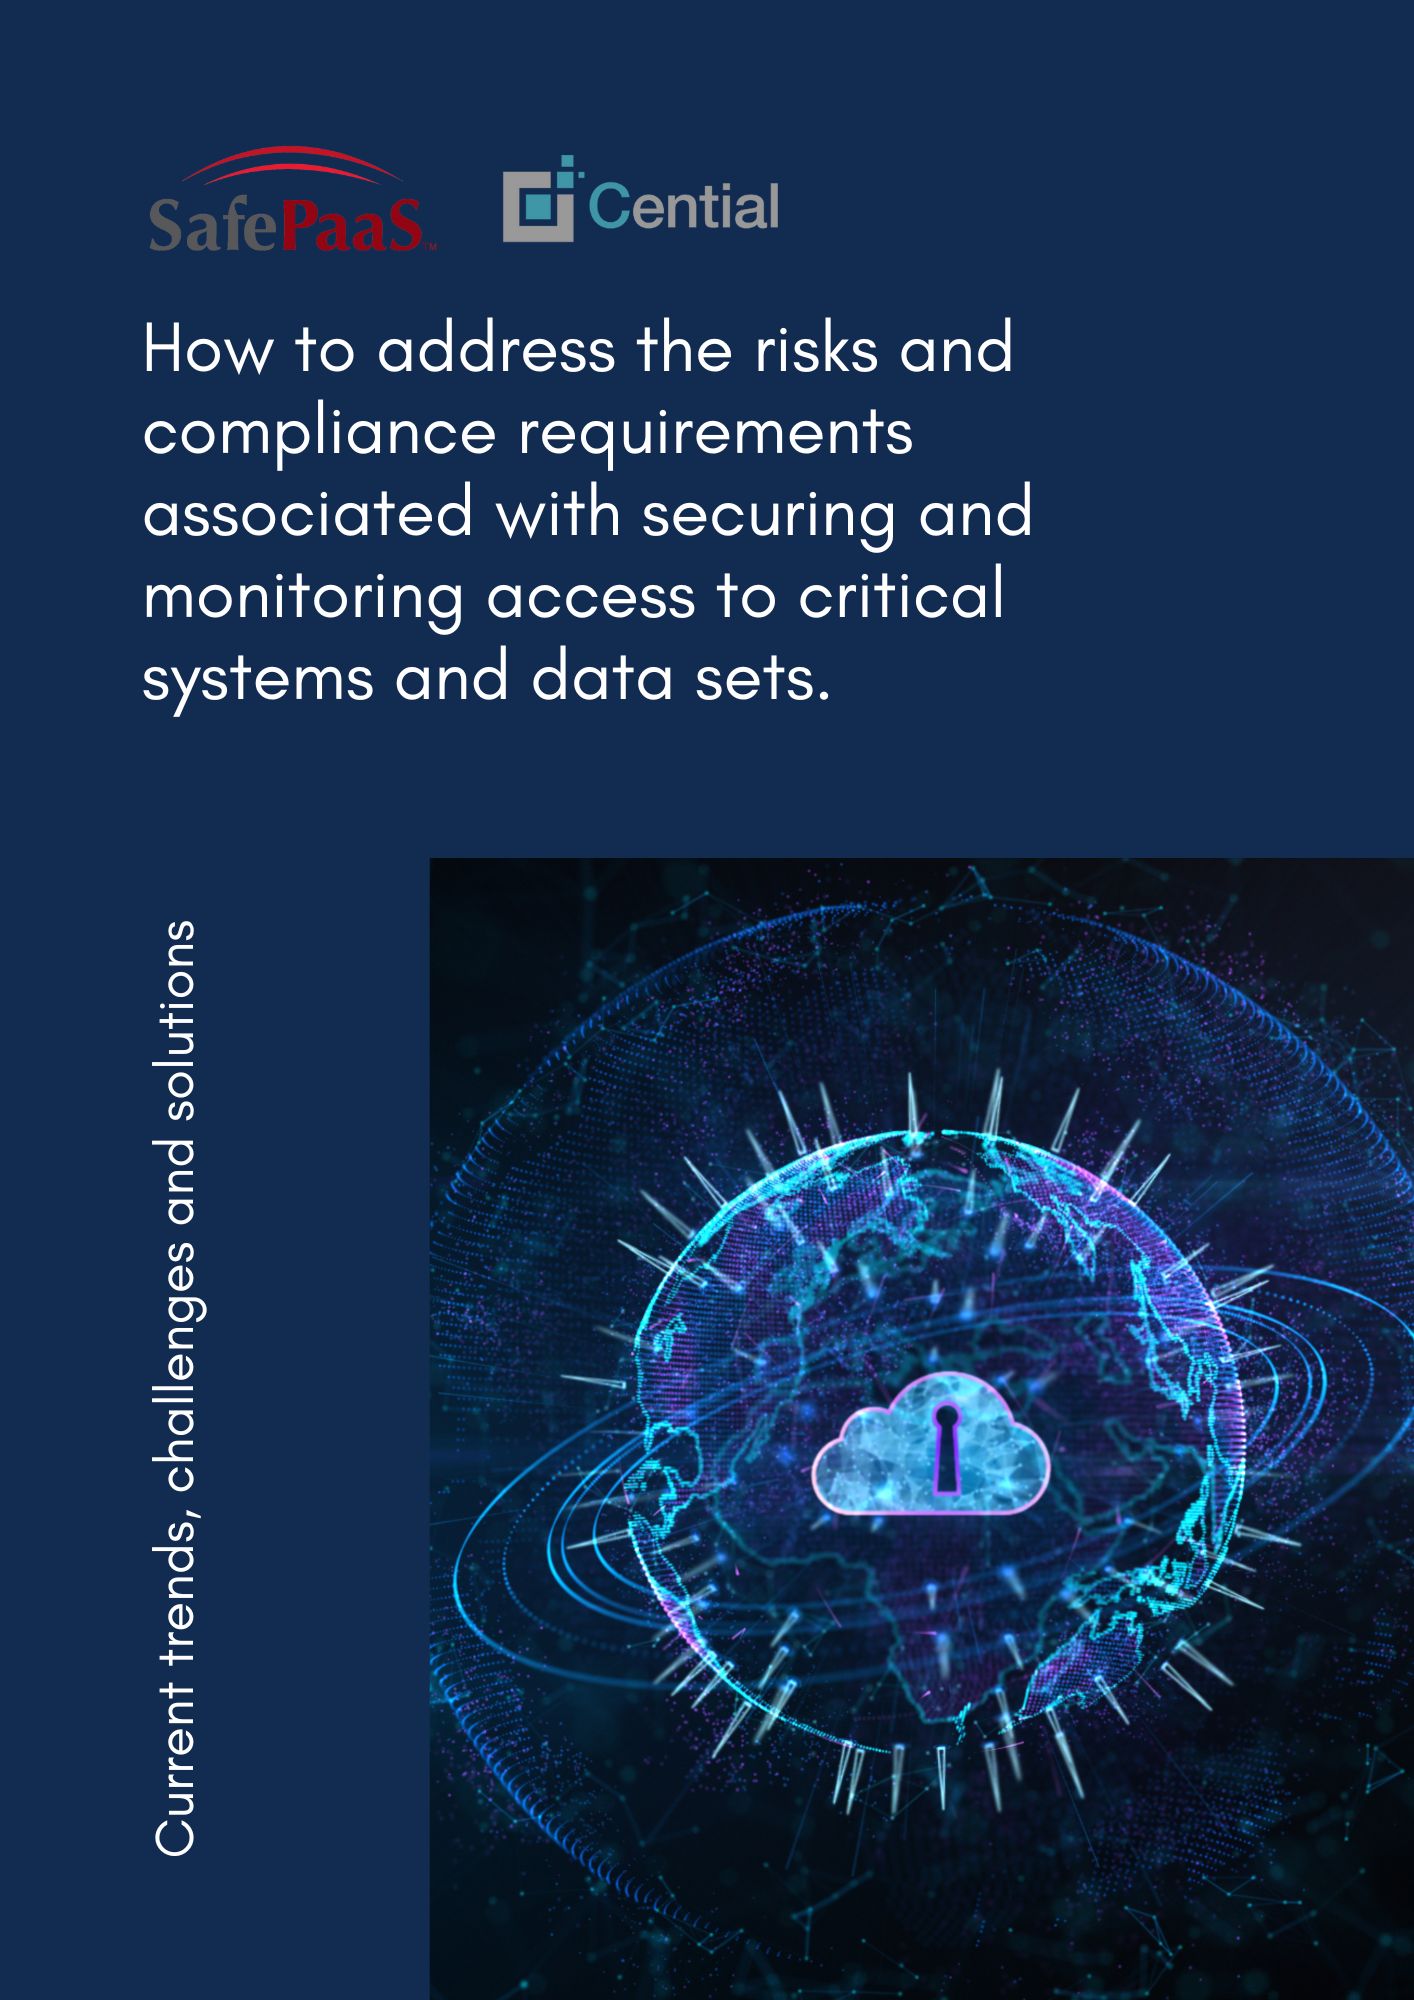 Secure access to critical systems